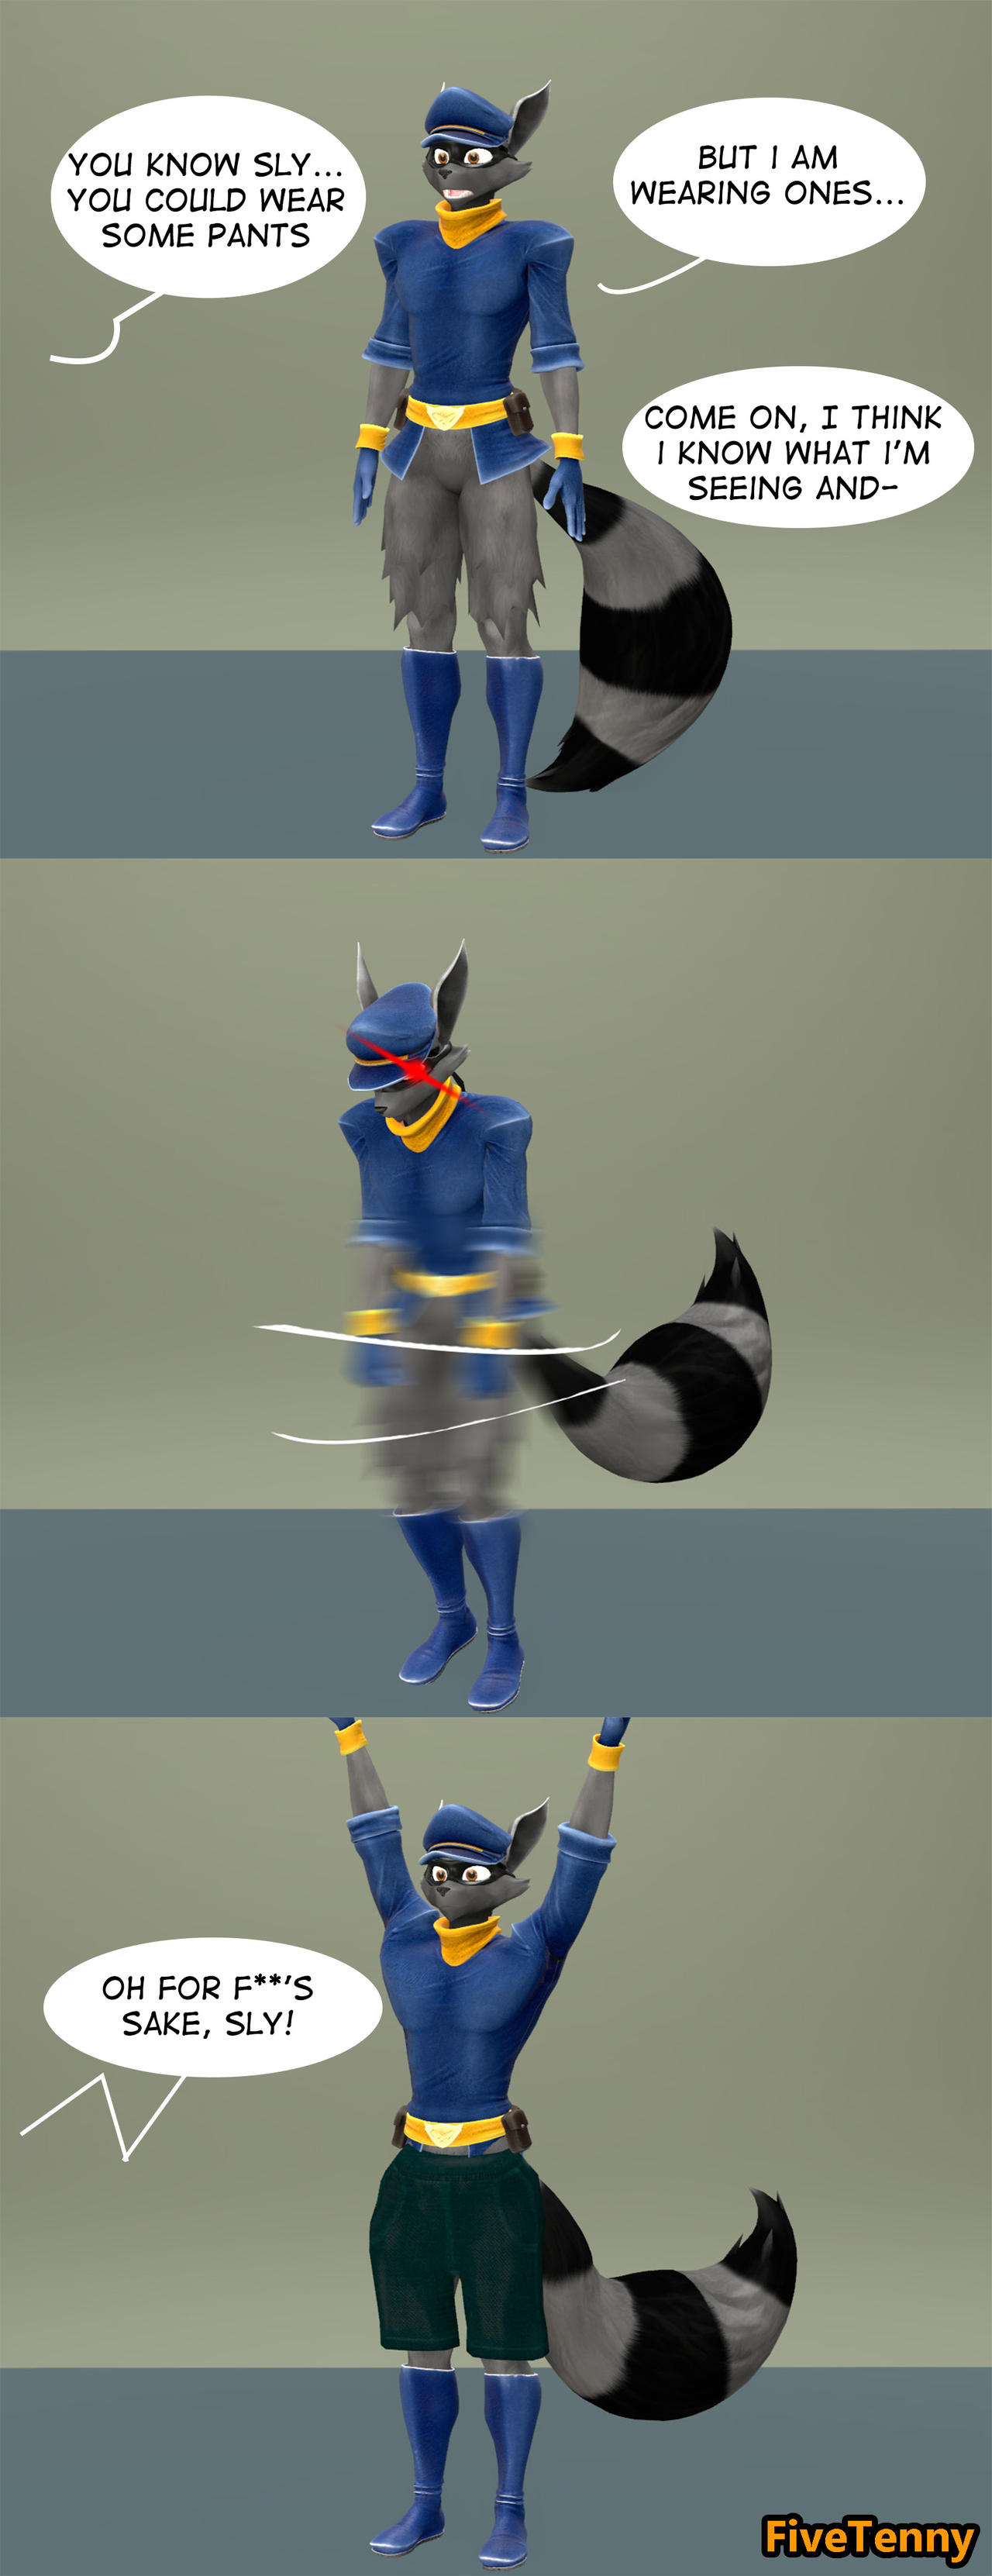 Sly Cooper Thieves In Time (PS3) by Stevenafc11 on DeviantArt